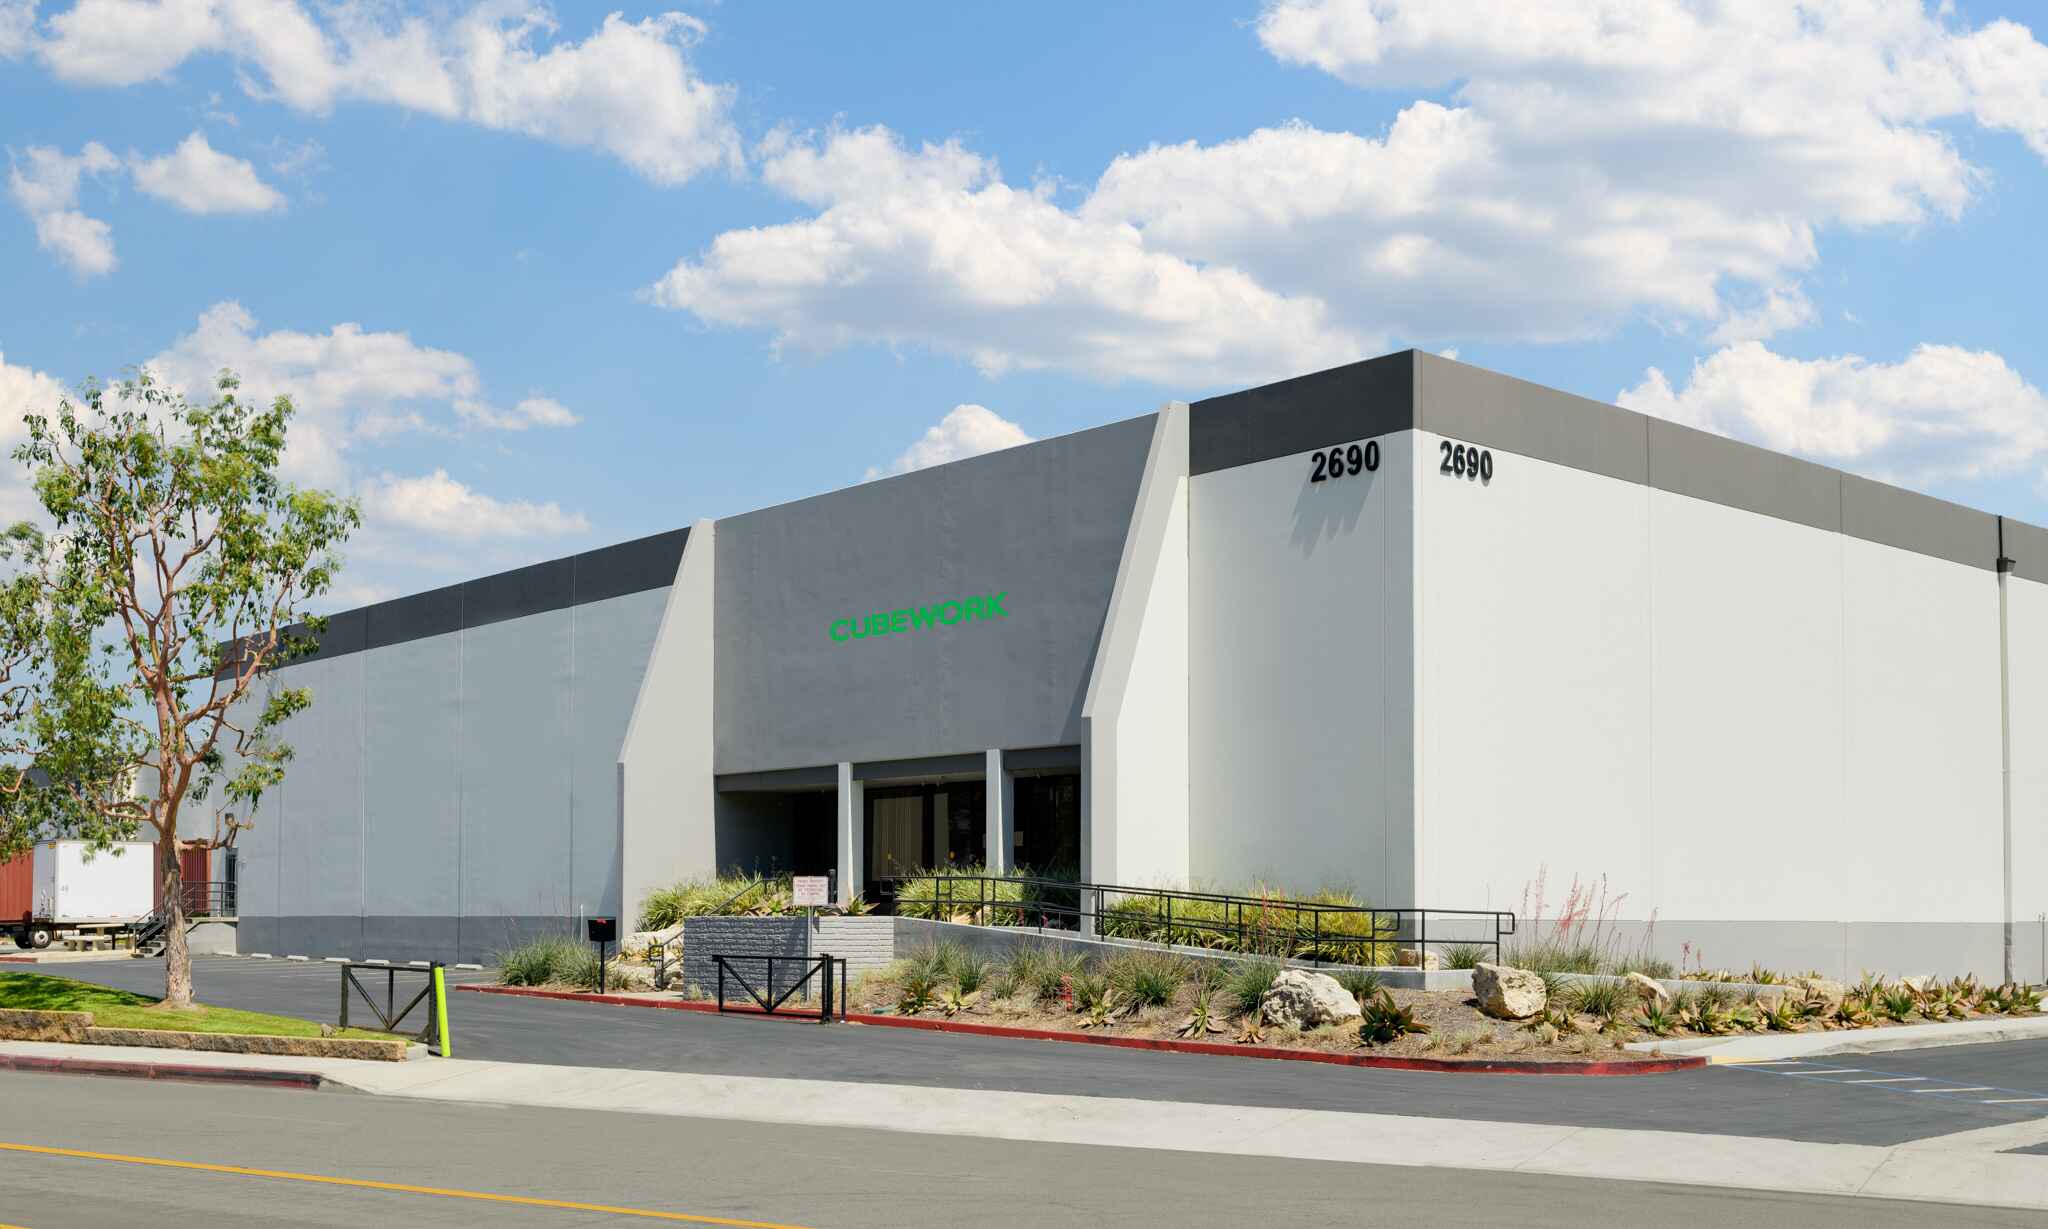  Warehouse and Office Space Available! – Pellisier 2690, CA